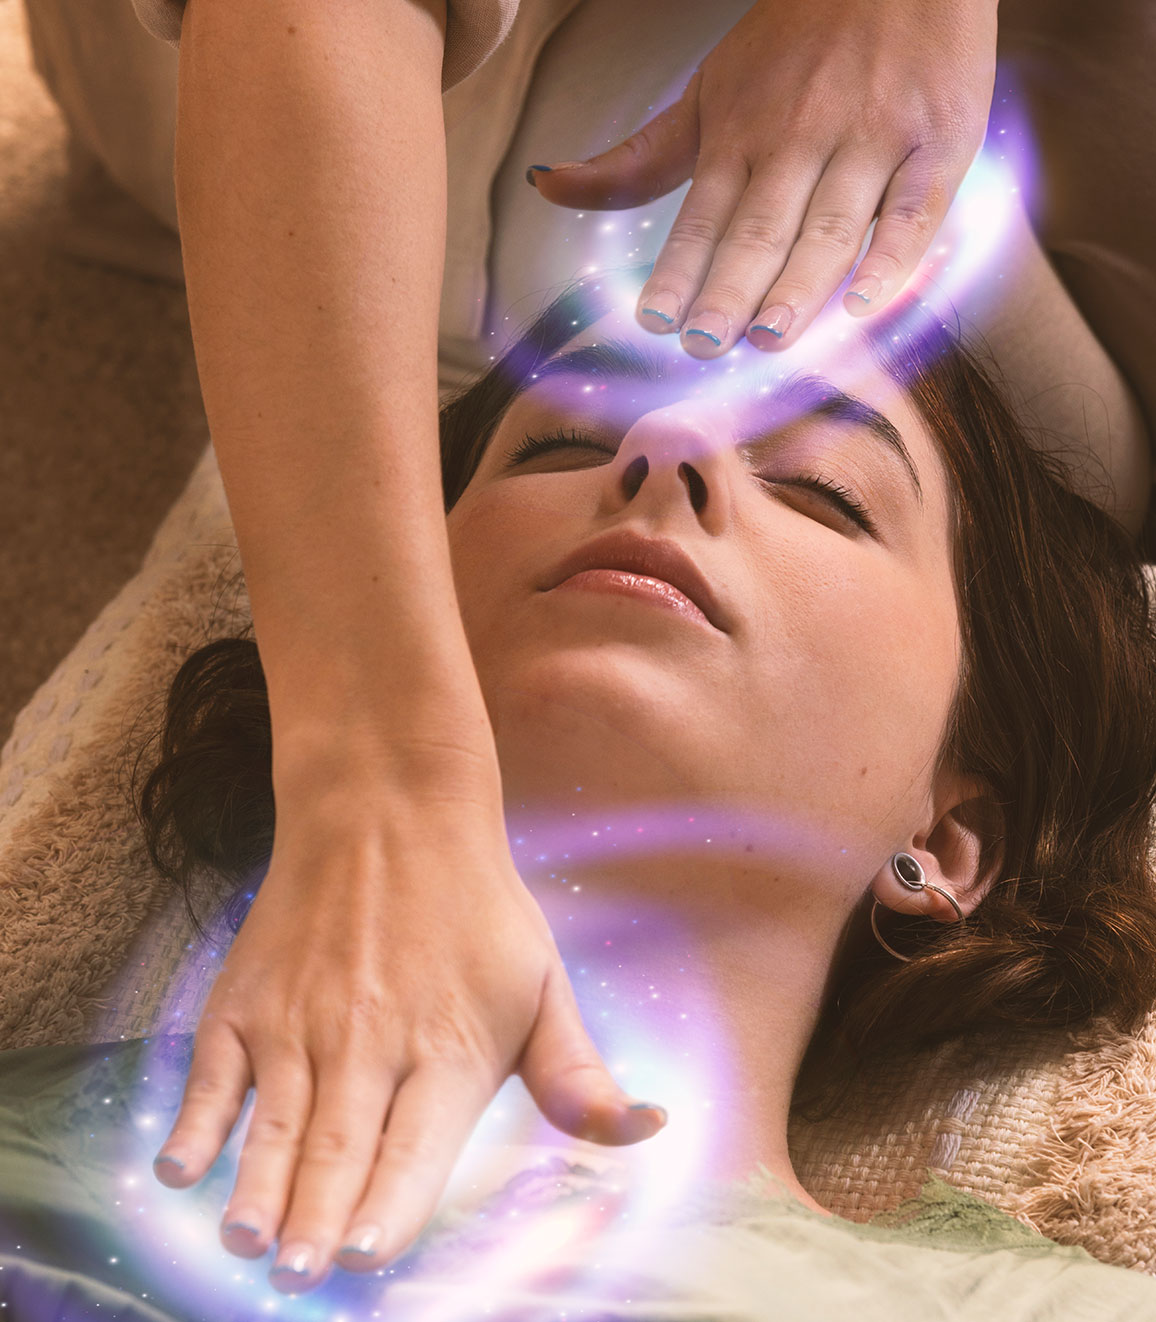  Difference Between Reiki and Other Energy Healing